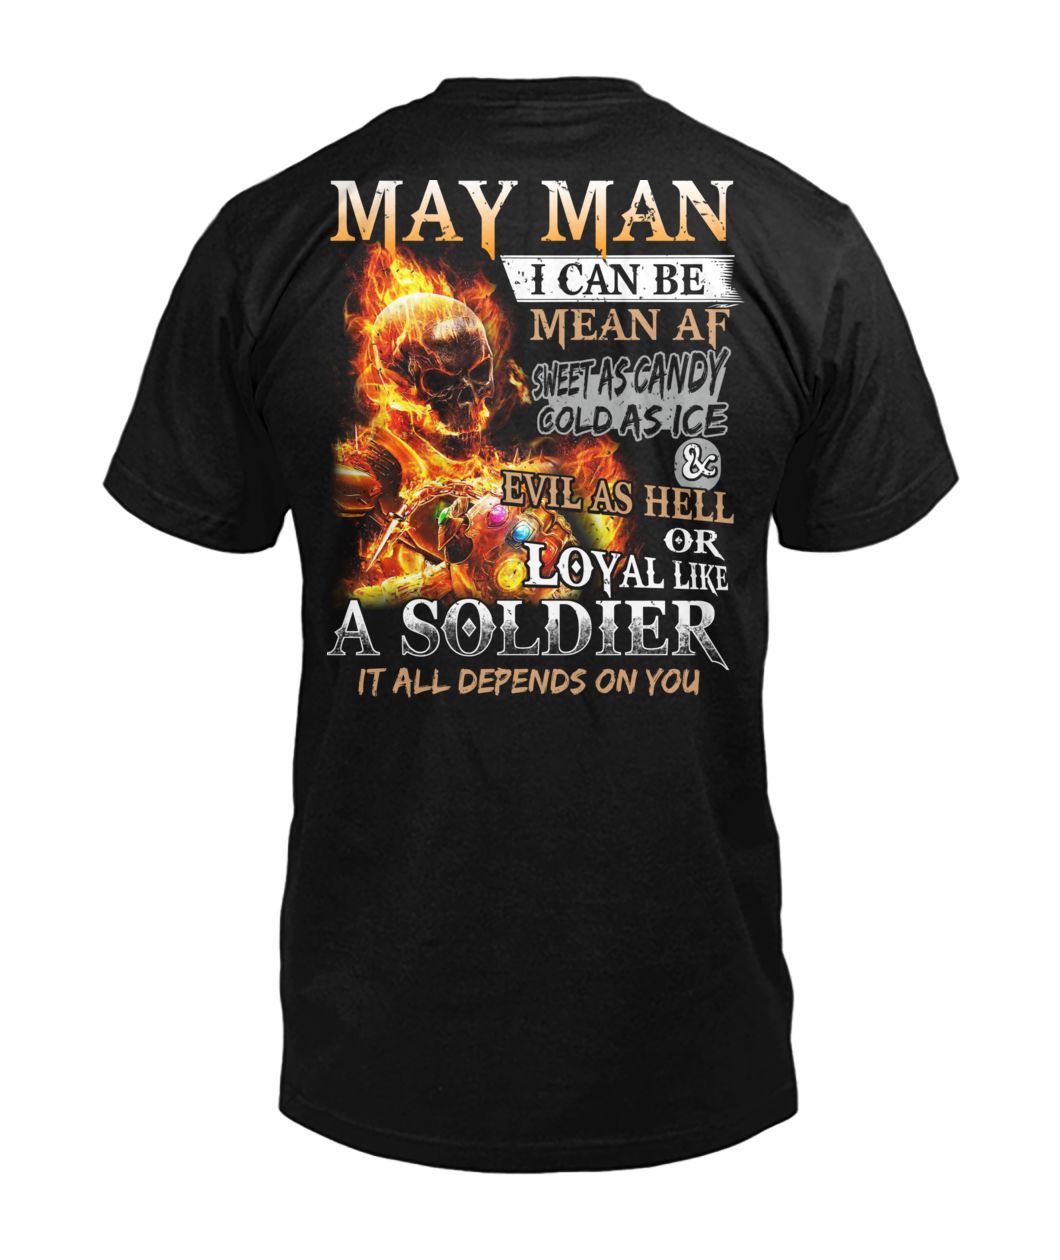 May man I can be mean af sweet as candy gold as ice and evil as hell mens v-neck